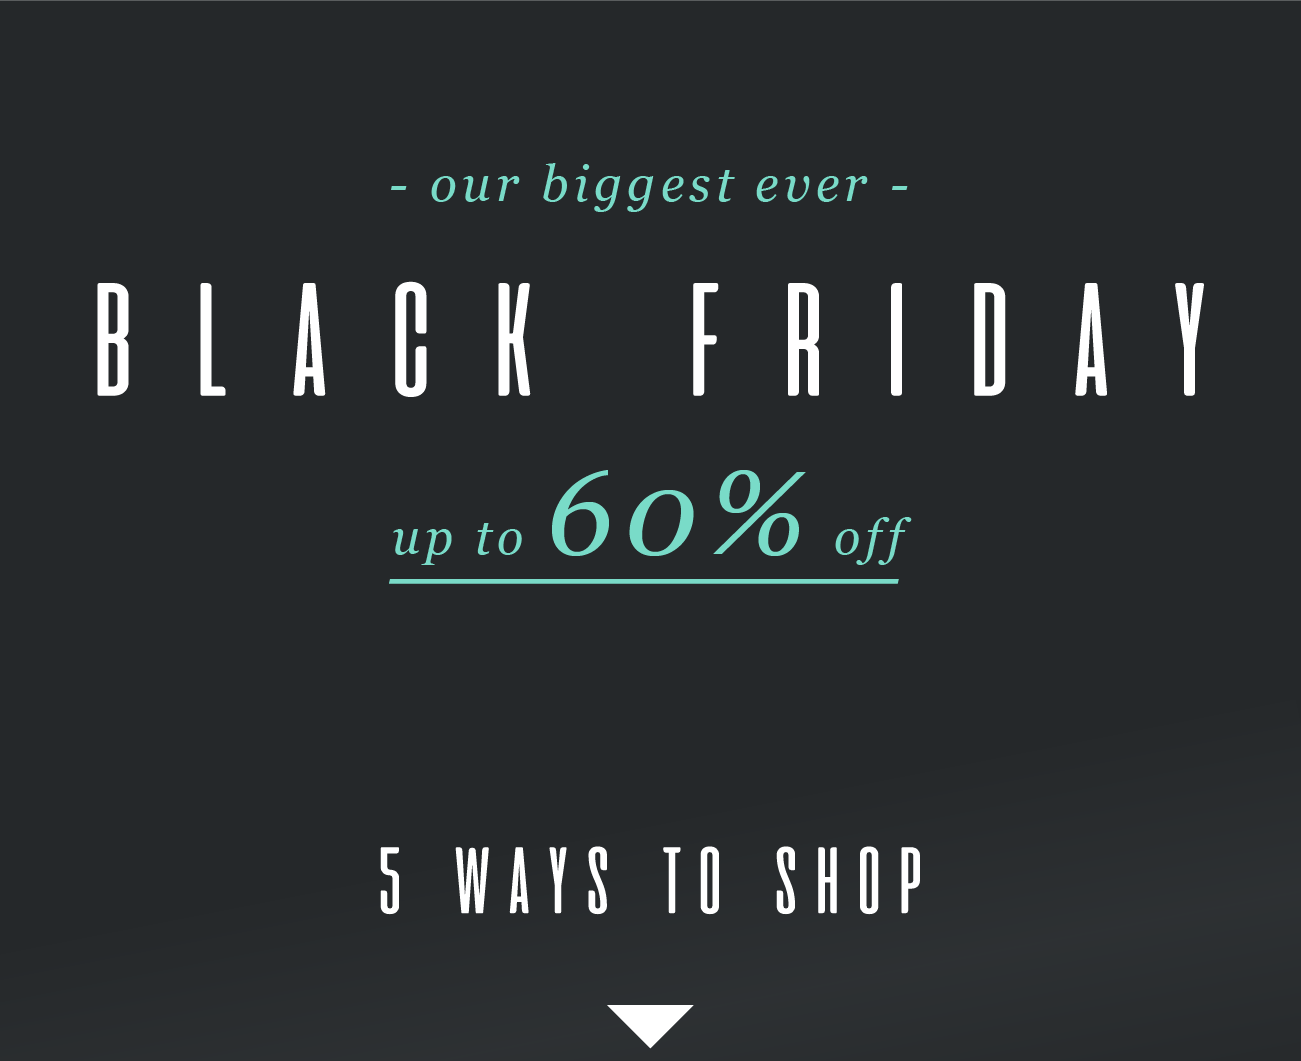 - our biggest ever -
BLACK FRIDAY
up to 60% offf
5 WAYS TO SHOP